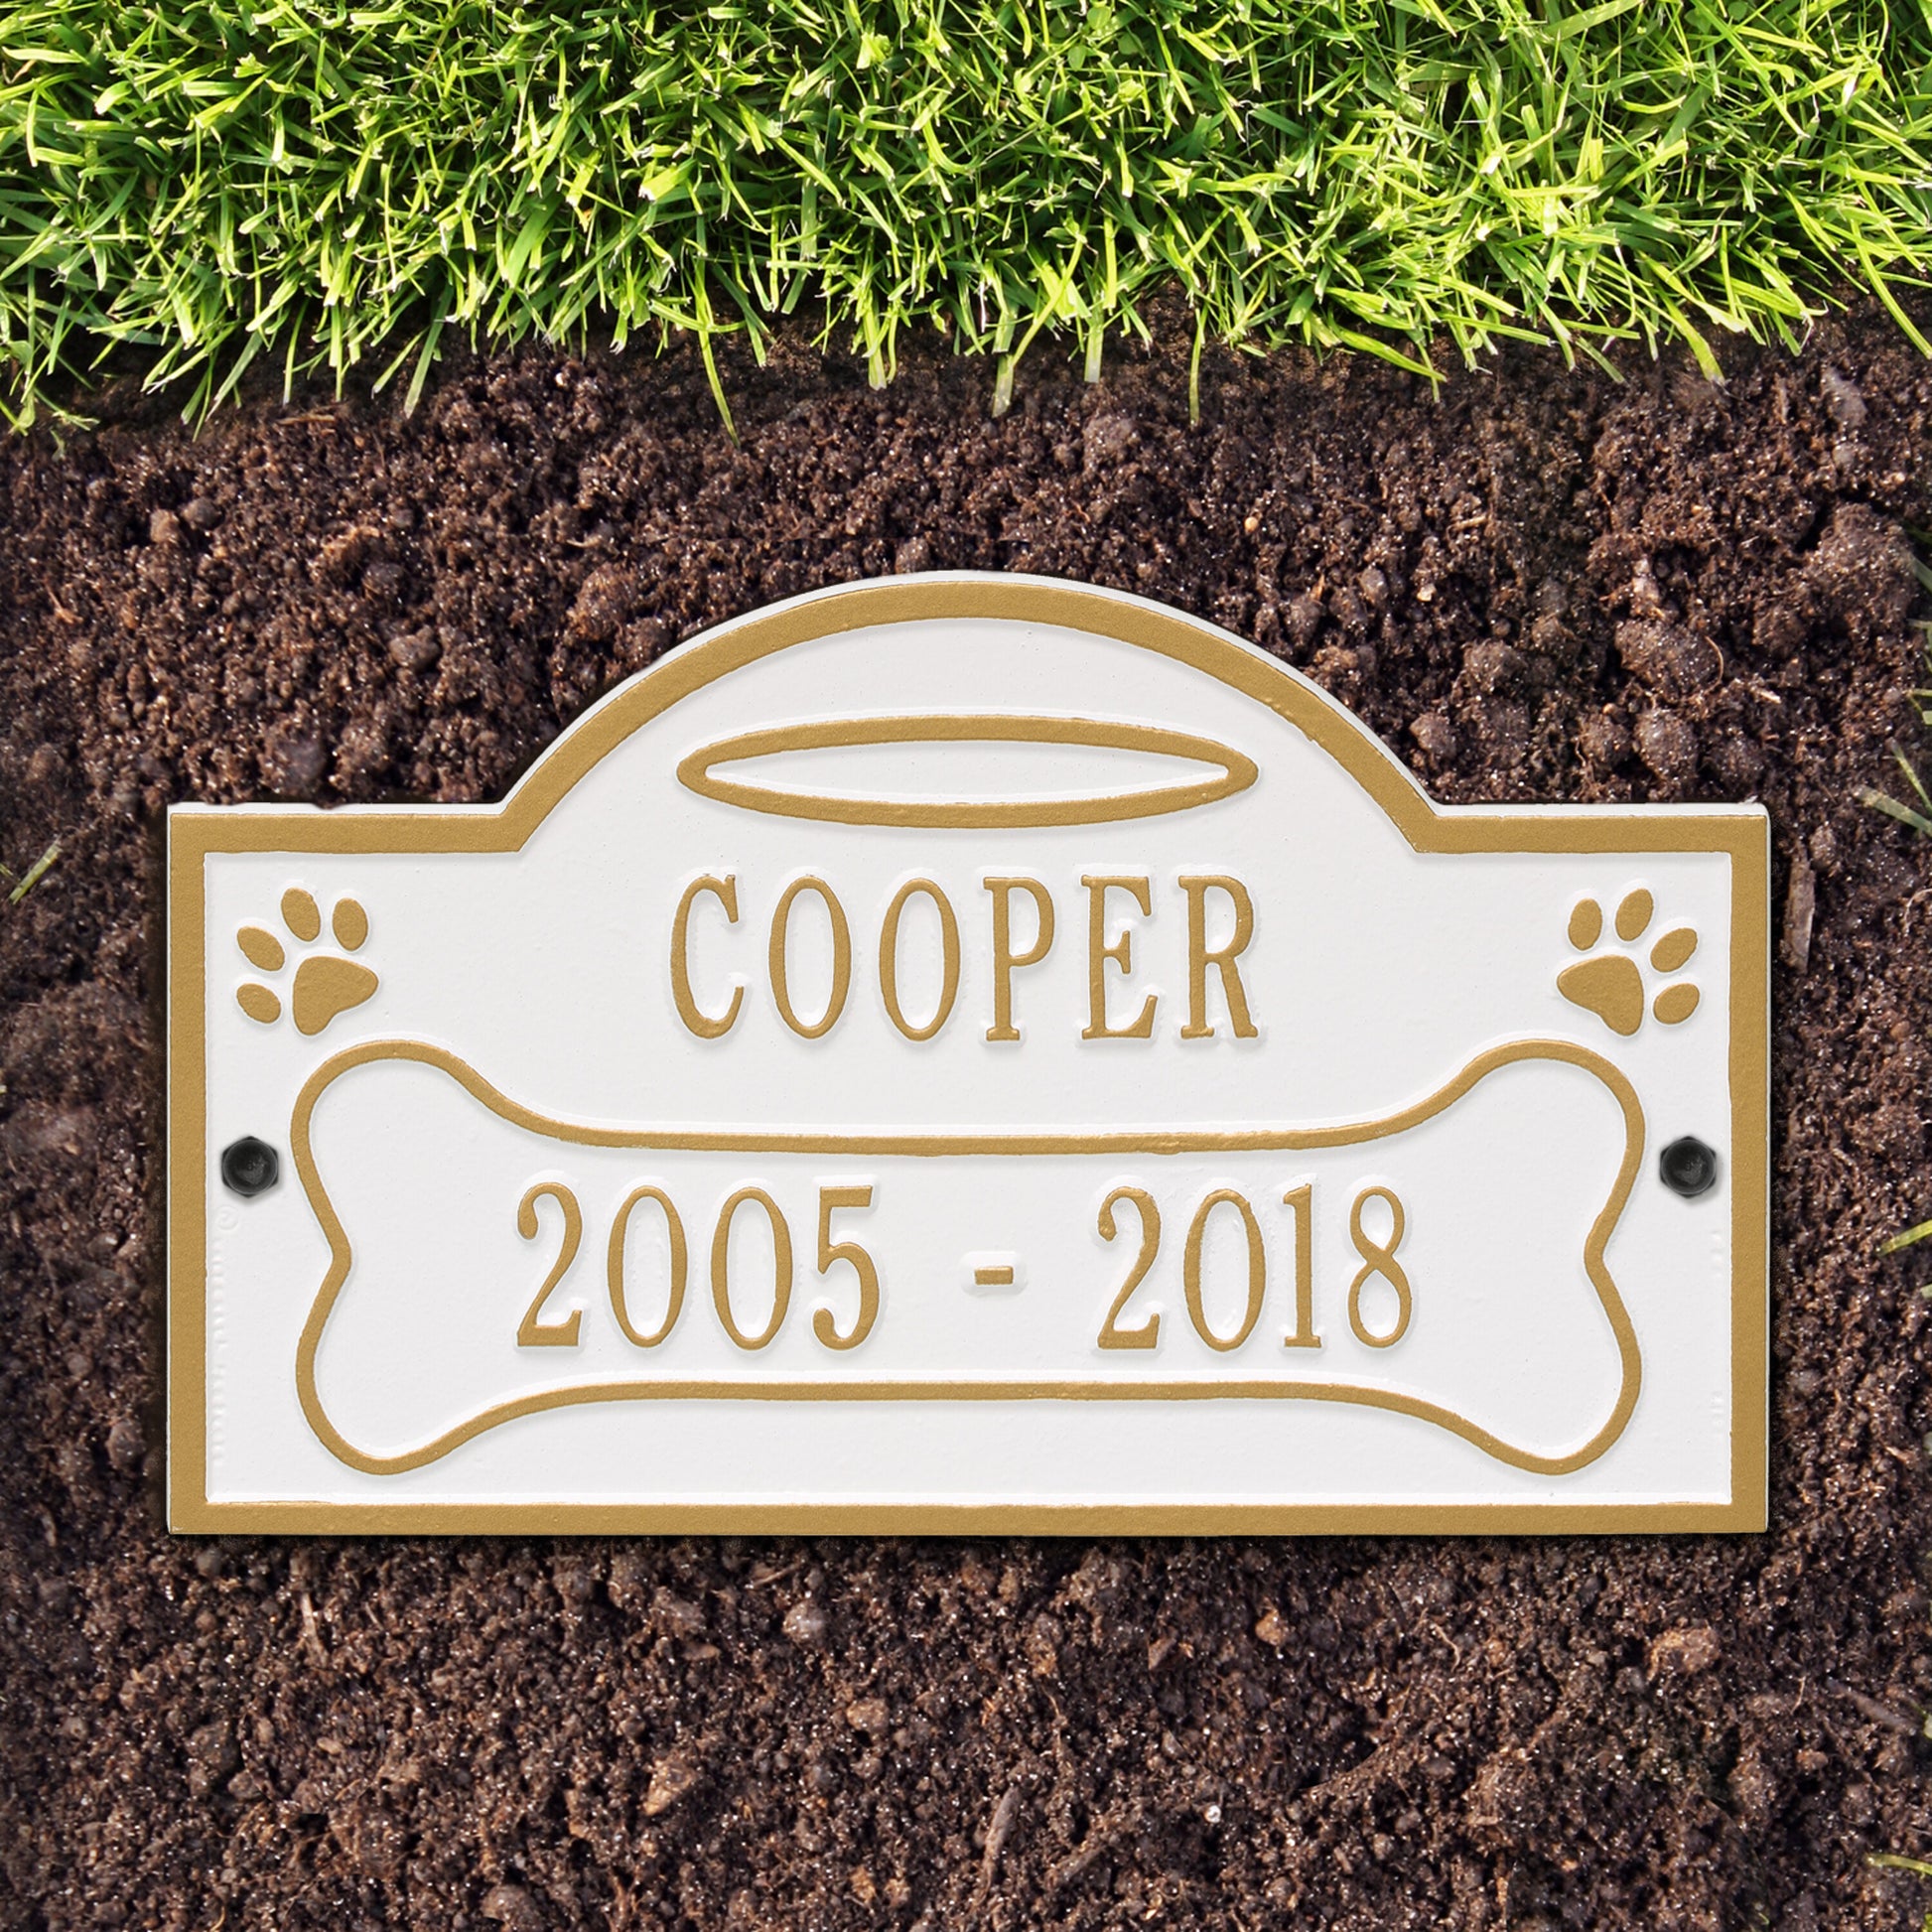 Whitehall Products All Dogs Go To Heaven Pet Memorial Personalized Wall Or Ground Plaque Two Lines Bronze Verdigris